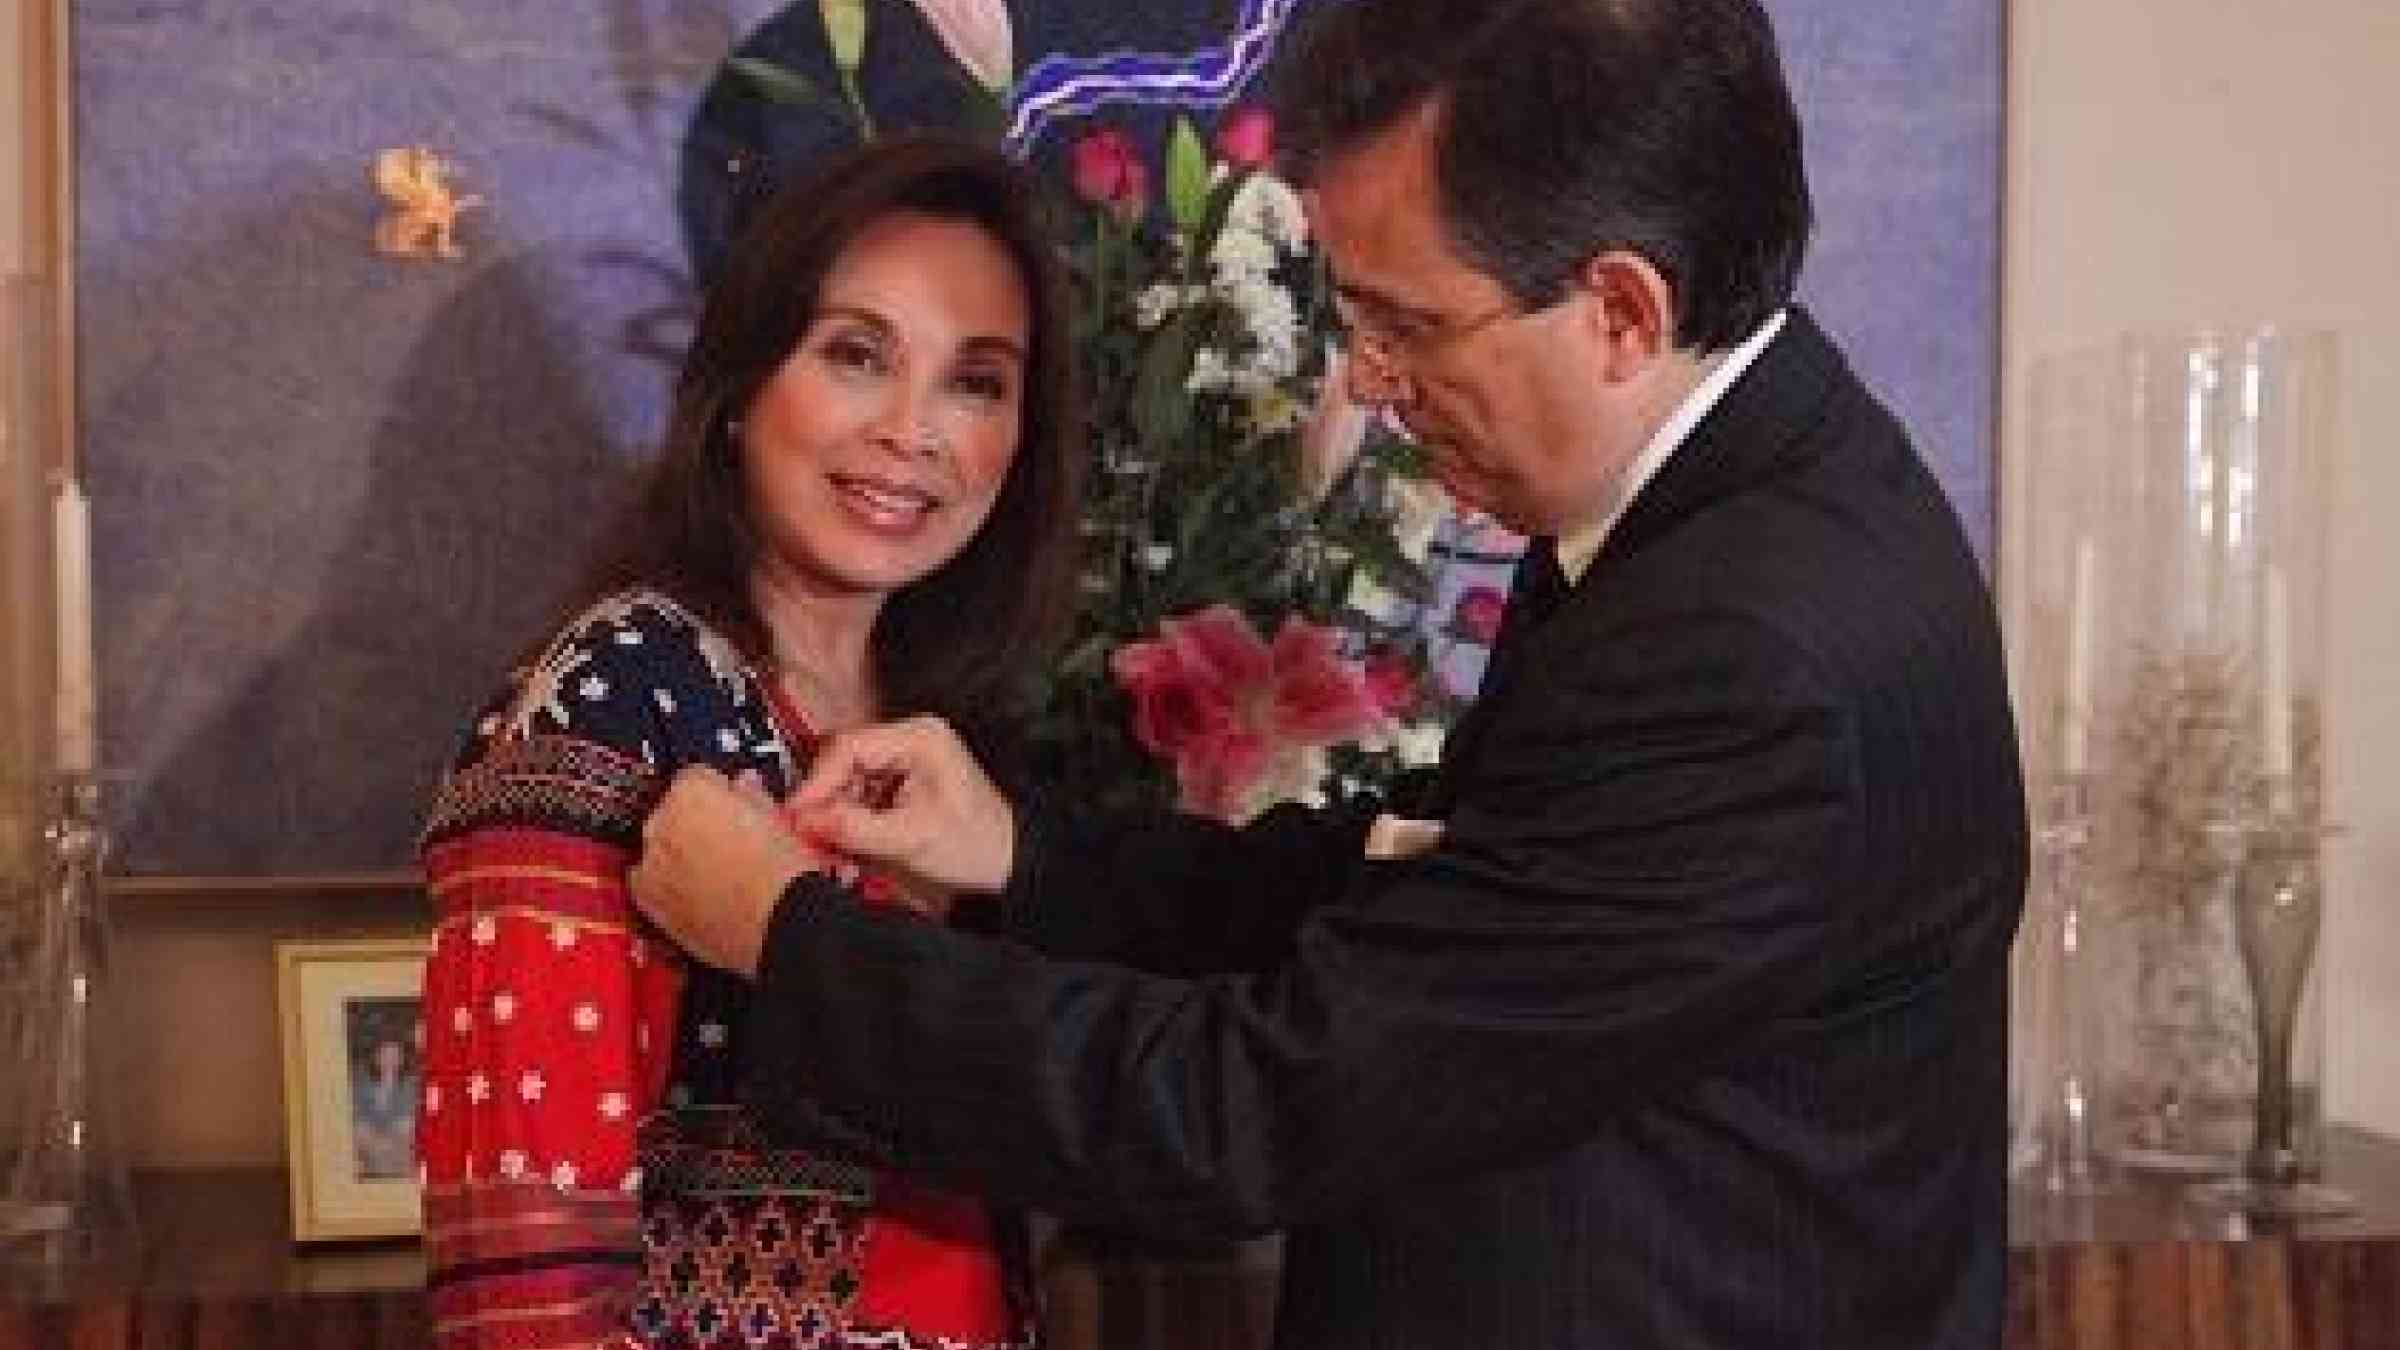 Senator Loren Legarda receiving the Legion of Honour from Ambassador Mr. Thierry Mathou acting on behalf of the French President Mr. Francois Hollande for her support to COP21 which adopted the Paris Agreement.